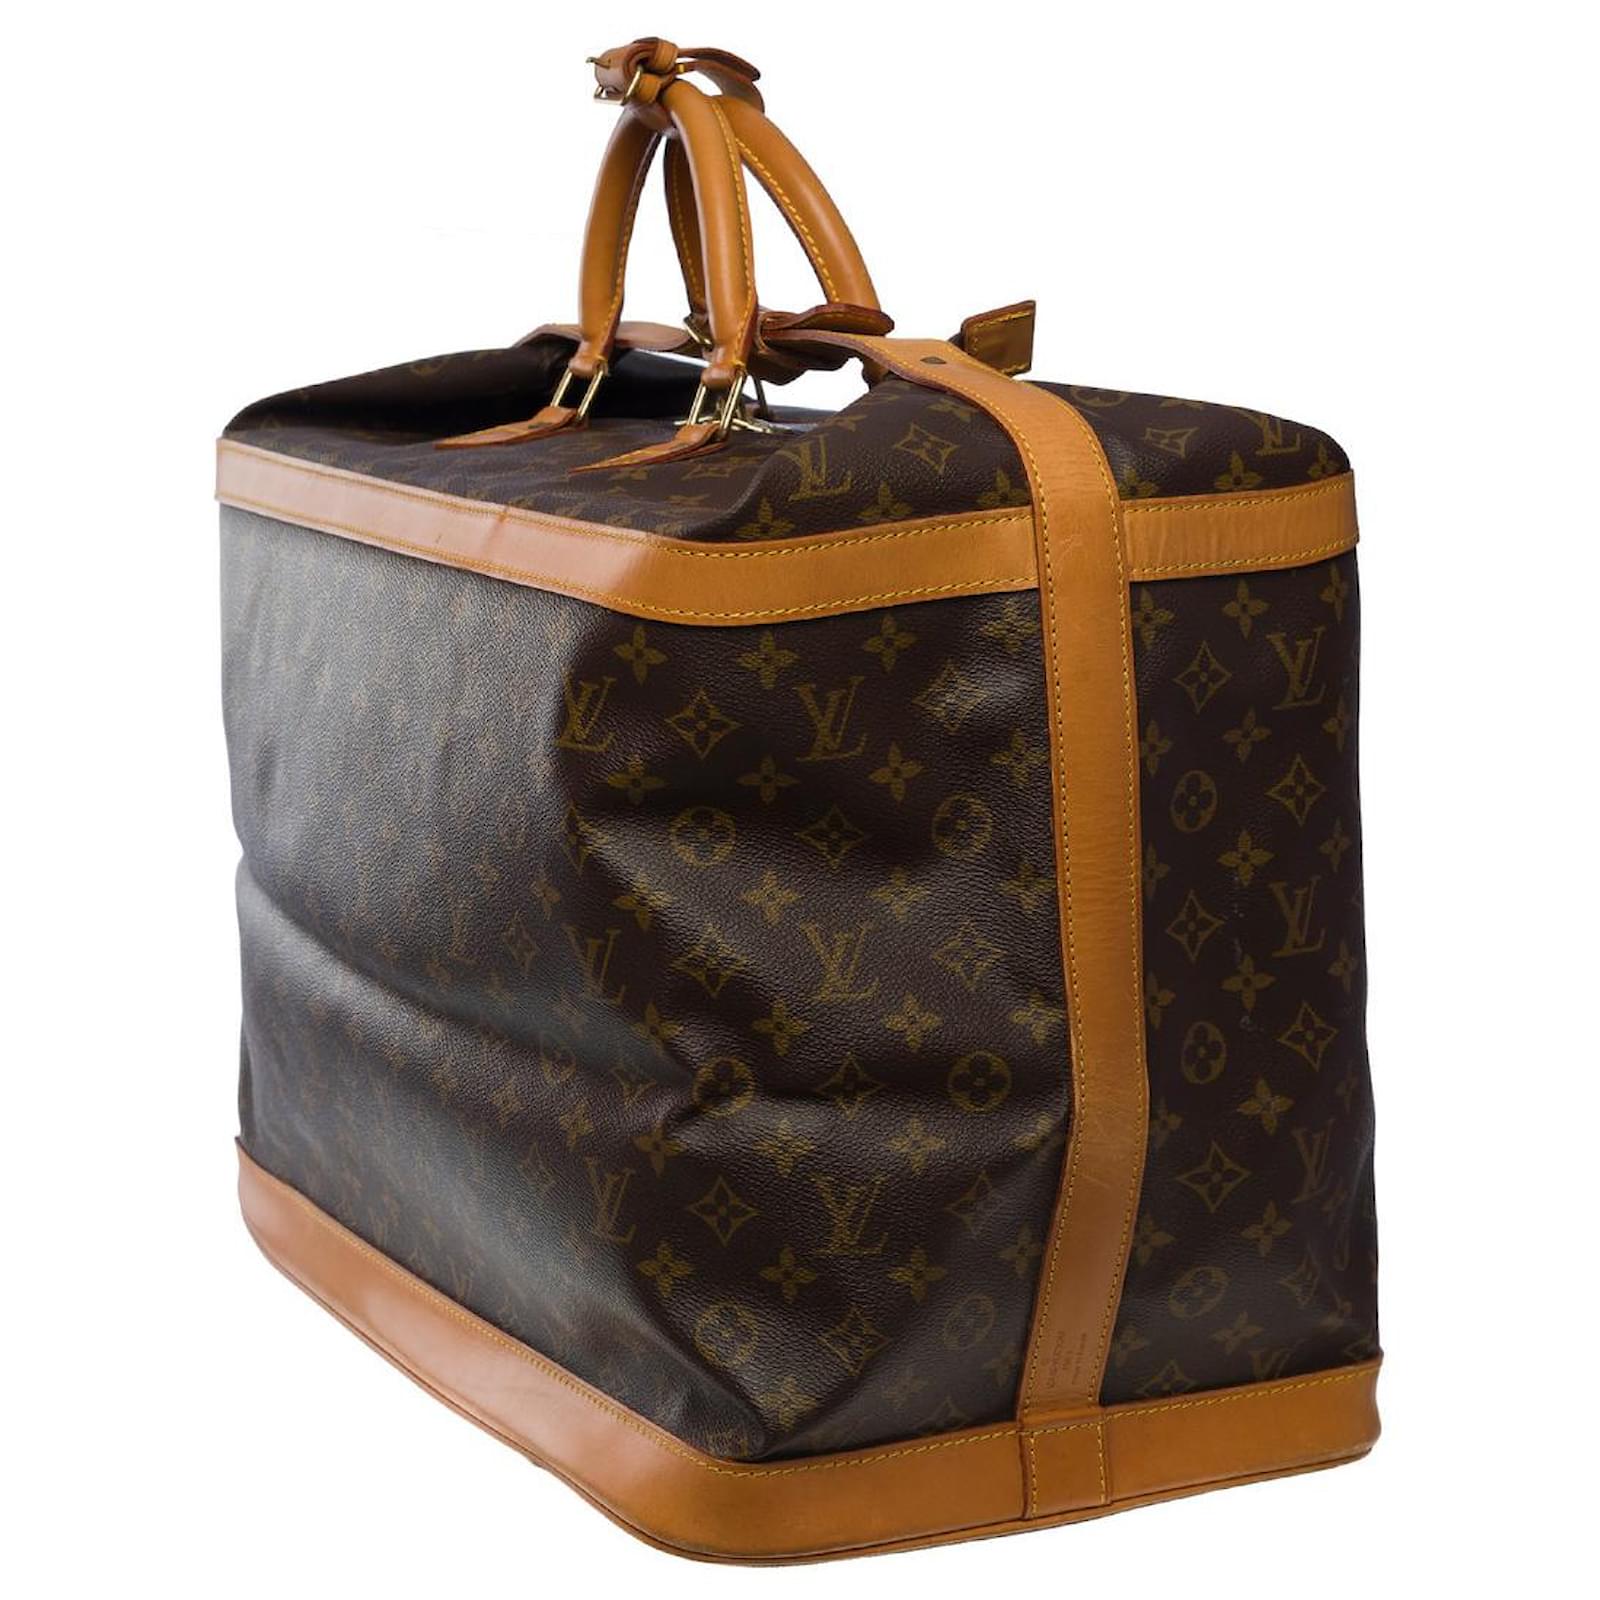 Louis Vuitton Cruiser 50 travel bag in brown monogram canvas and natural  leather